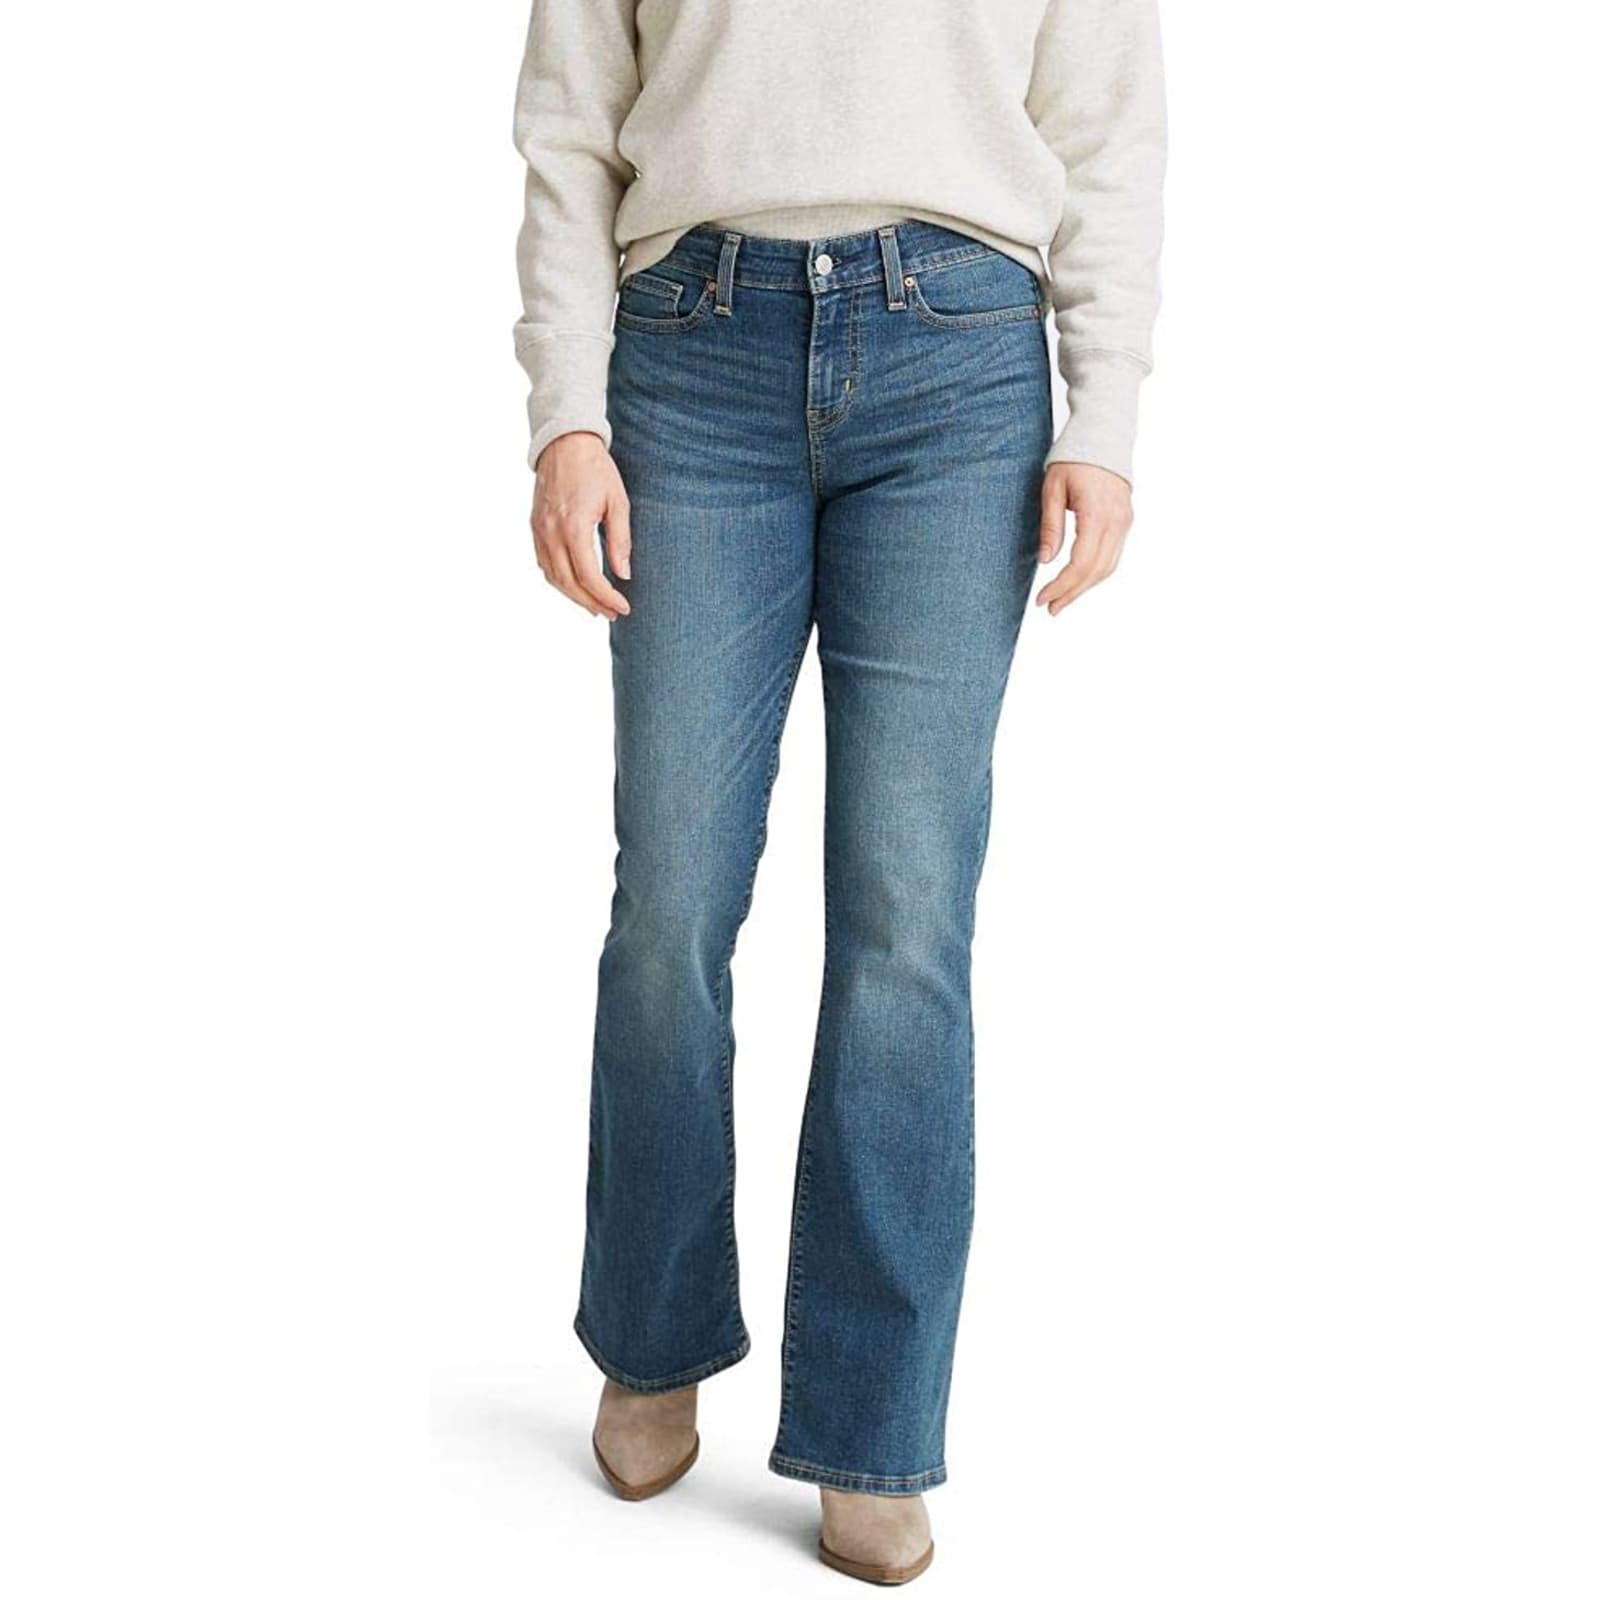 Women's Capetown Mid-Rise Bootcut Jeans by Signature By Levi's at Fleet Farm